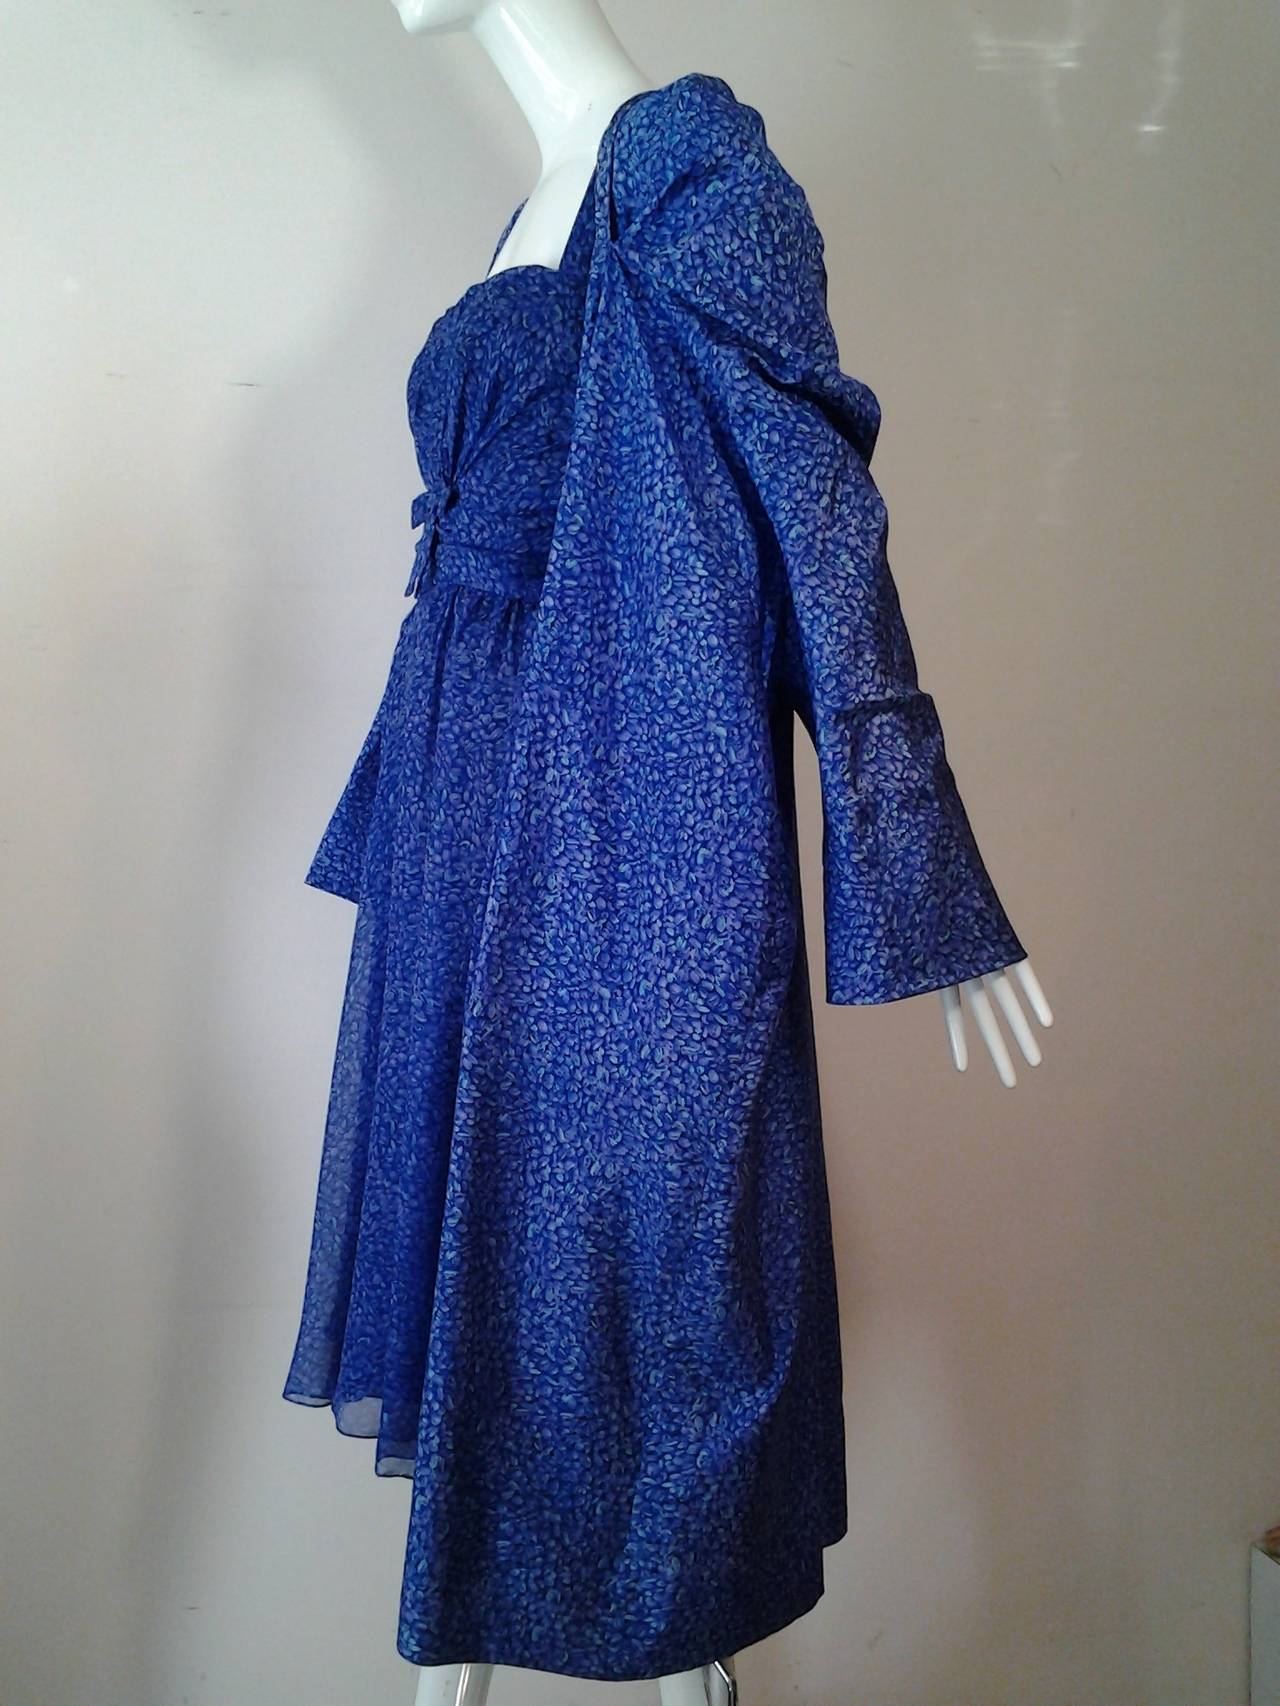 1950s Hattie Carnegie Silk Dress and Coat Ensemble - Owned By Ginger ...